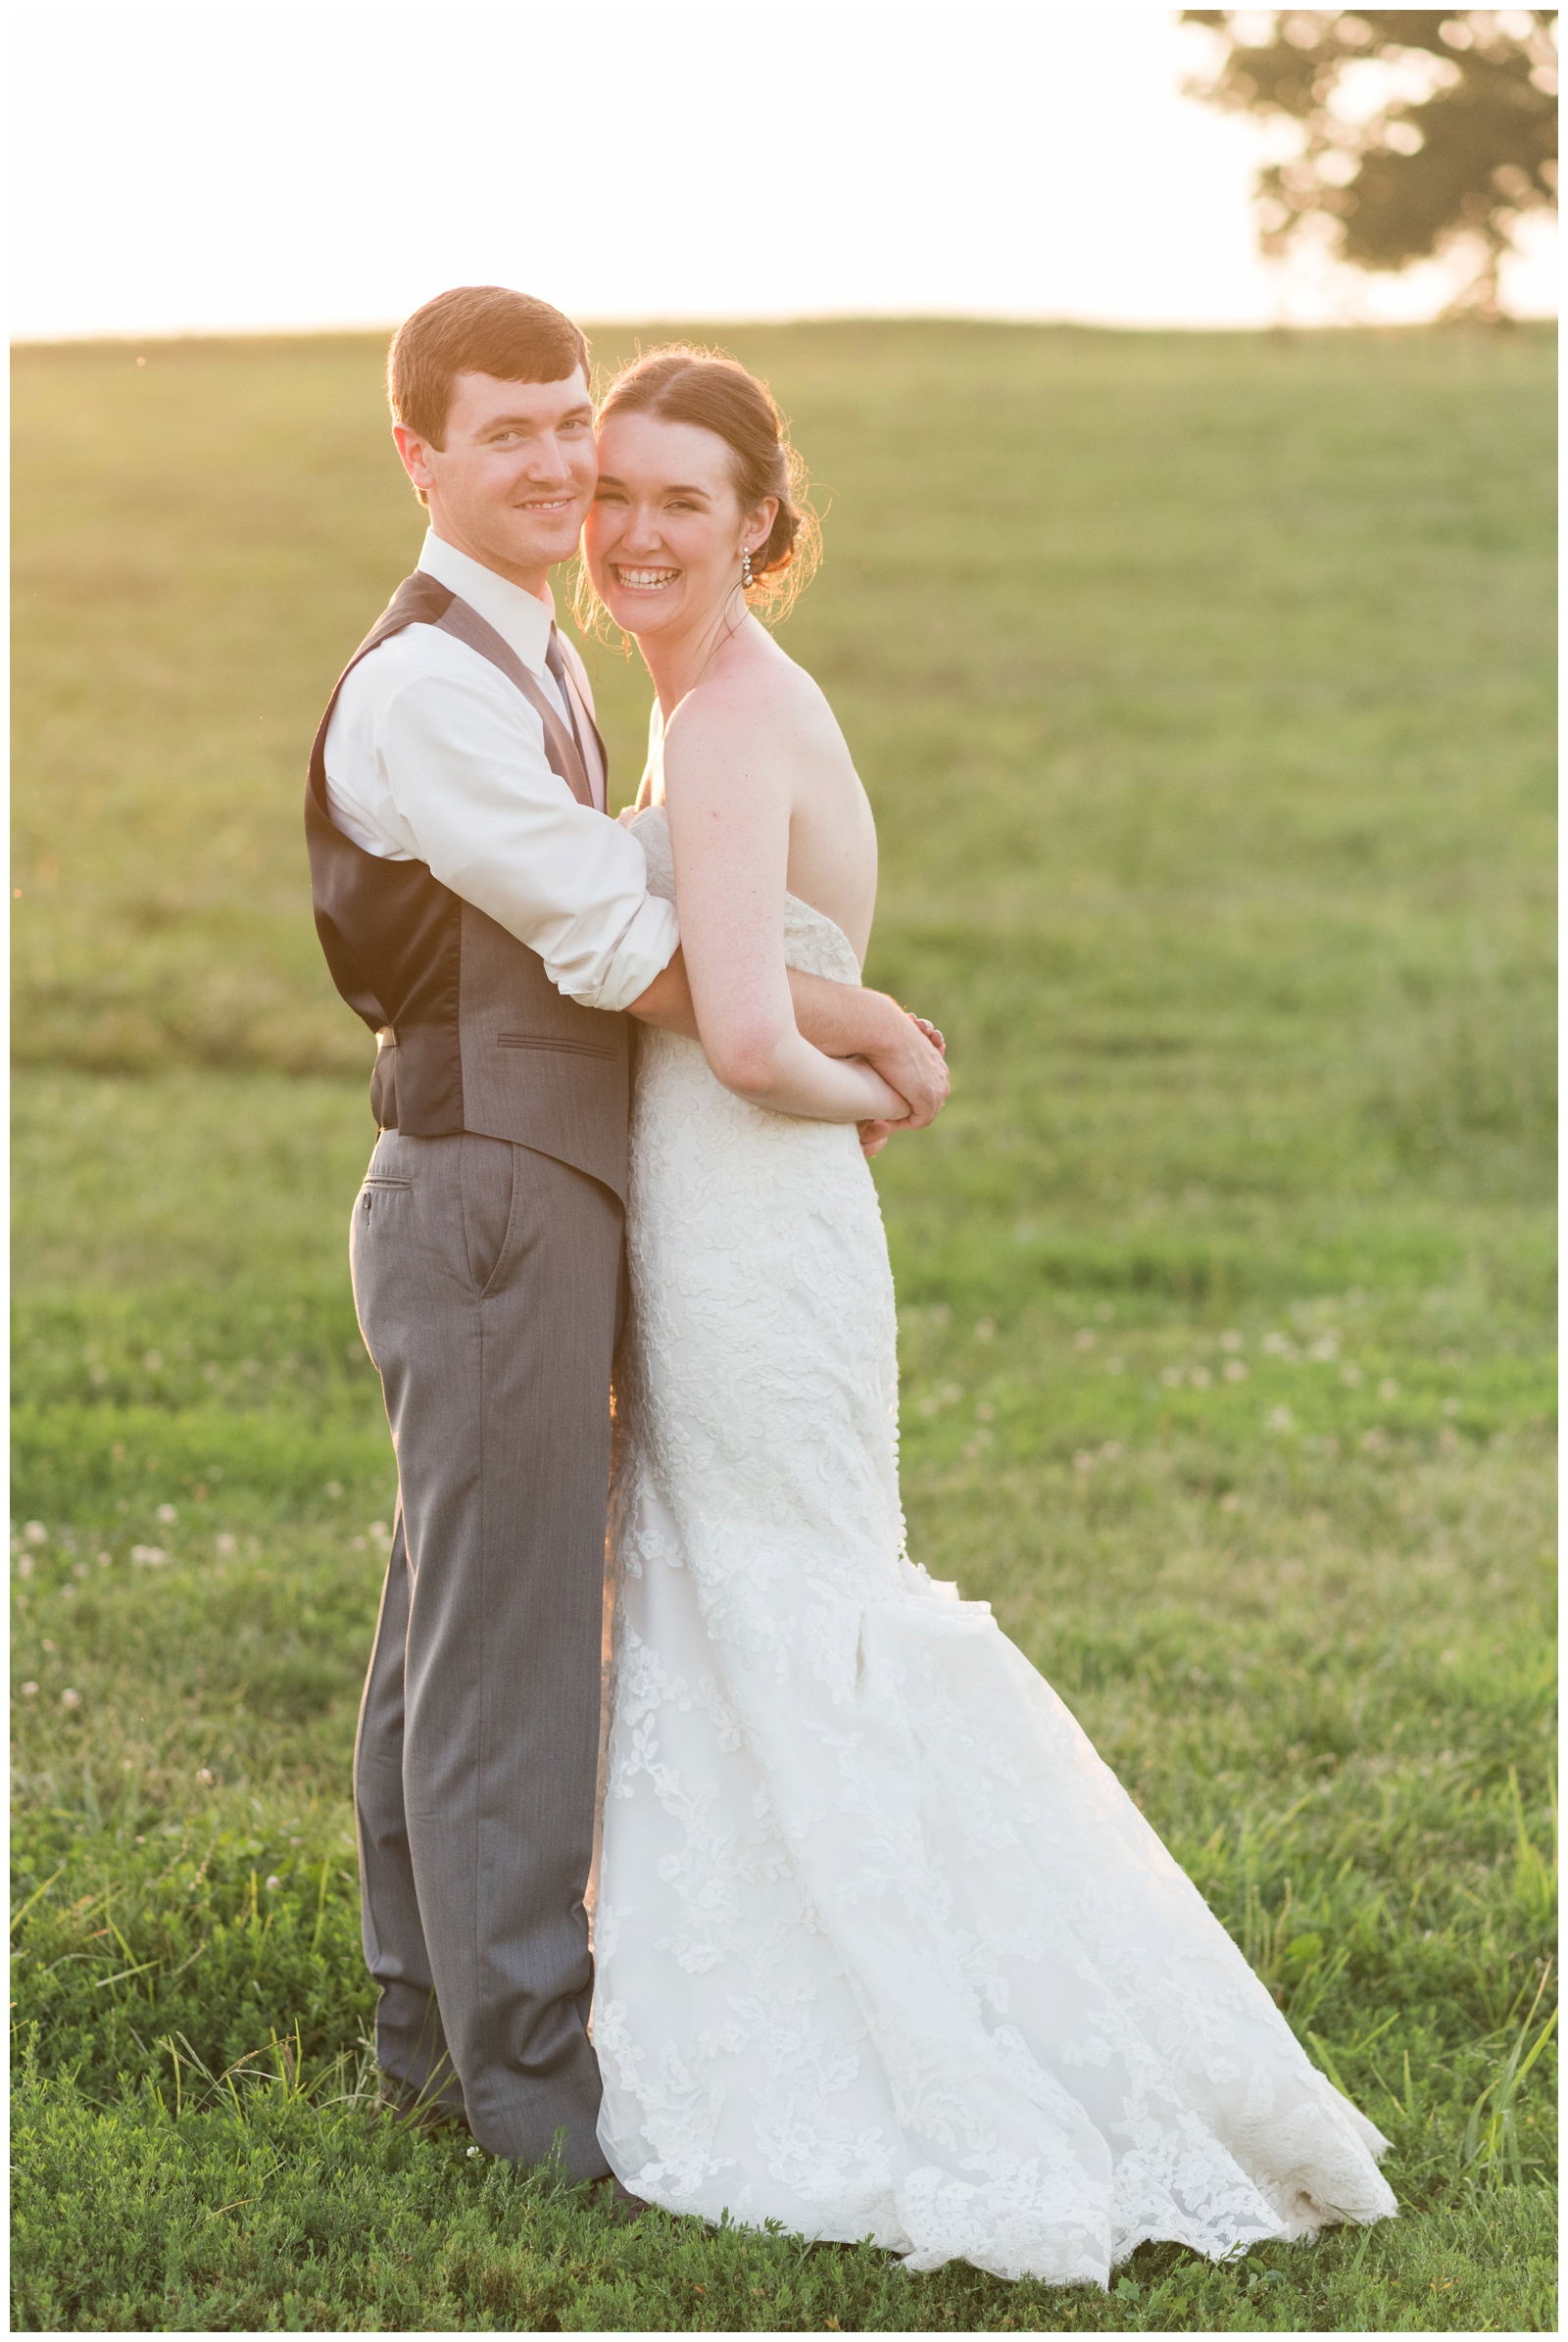 Bride and groom looking into camera smiling on their wedding day at sunset at harvest adventures in bremen ohio